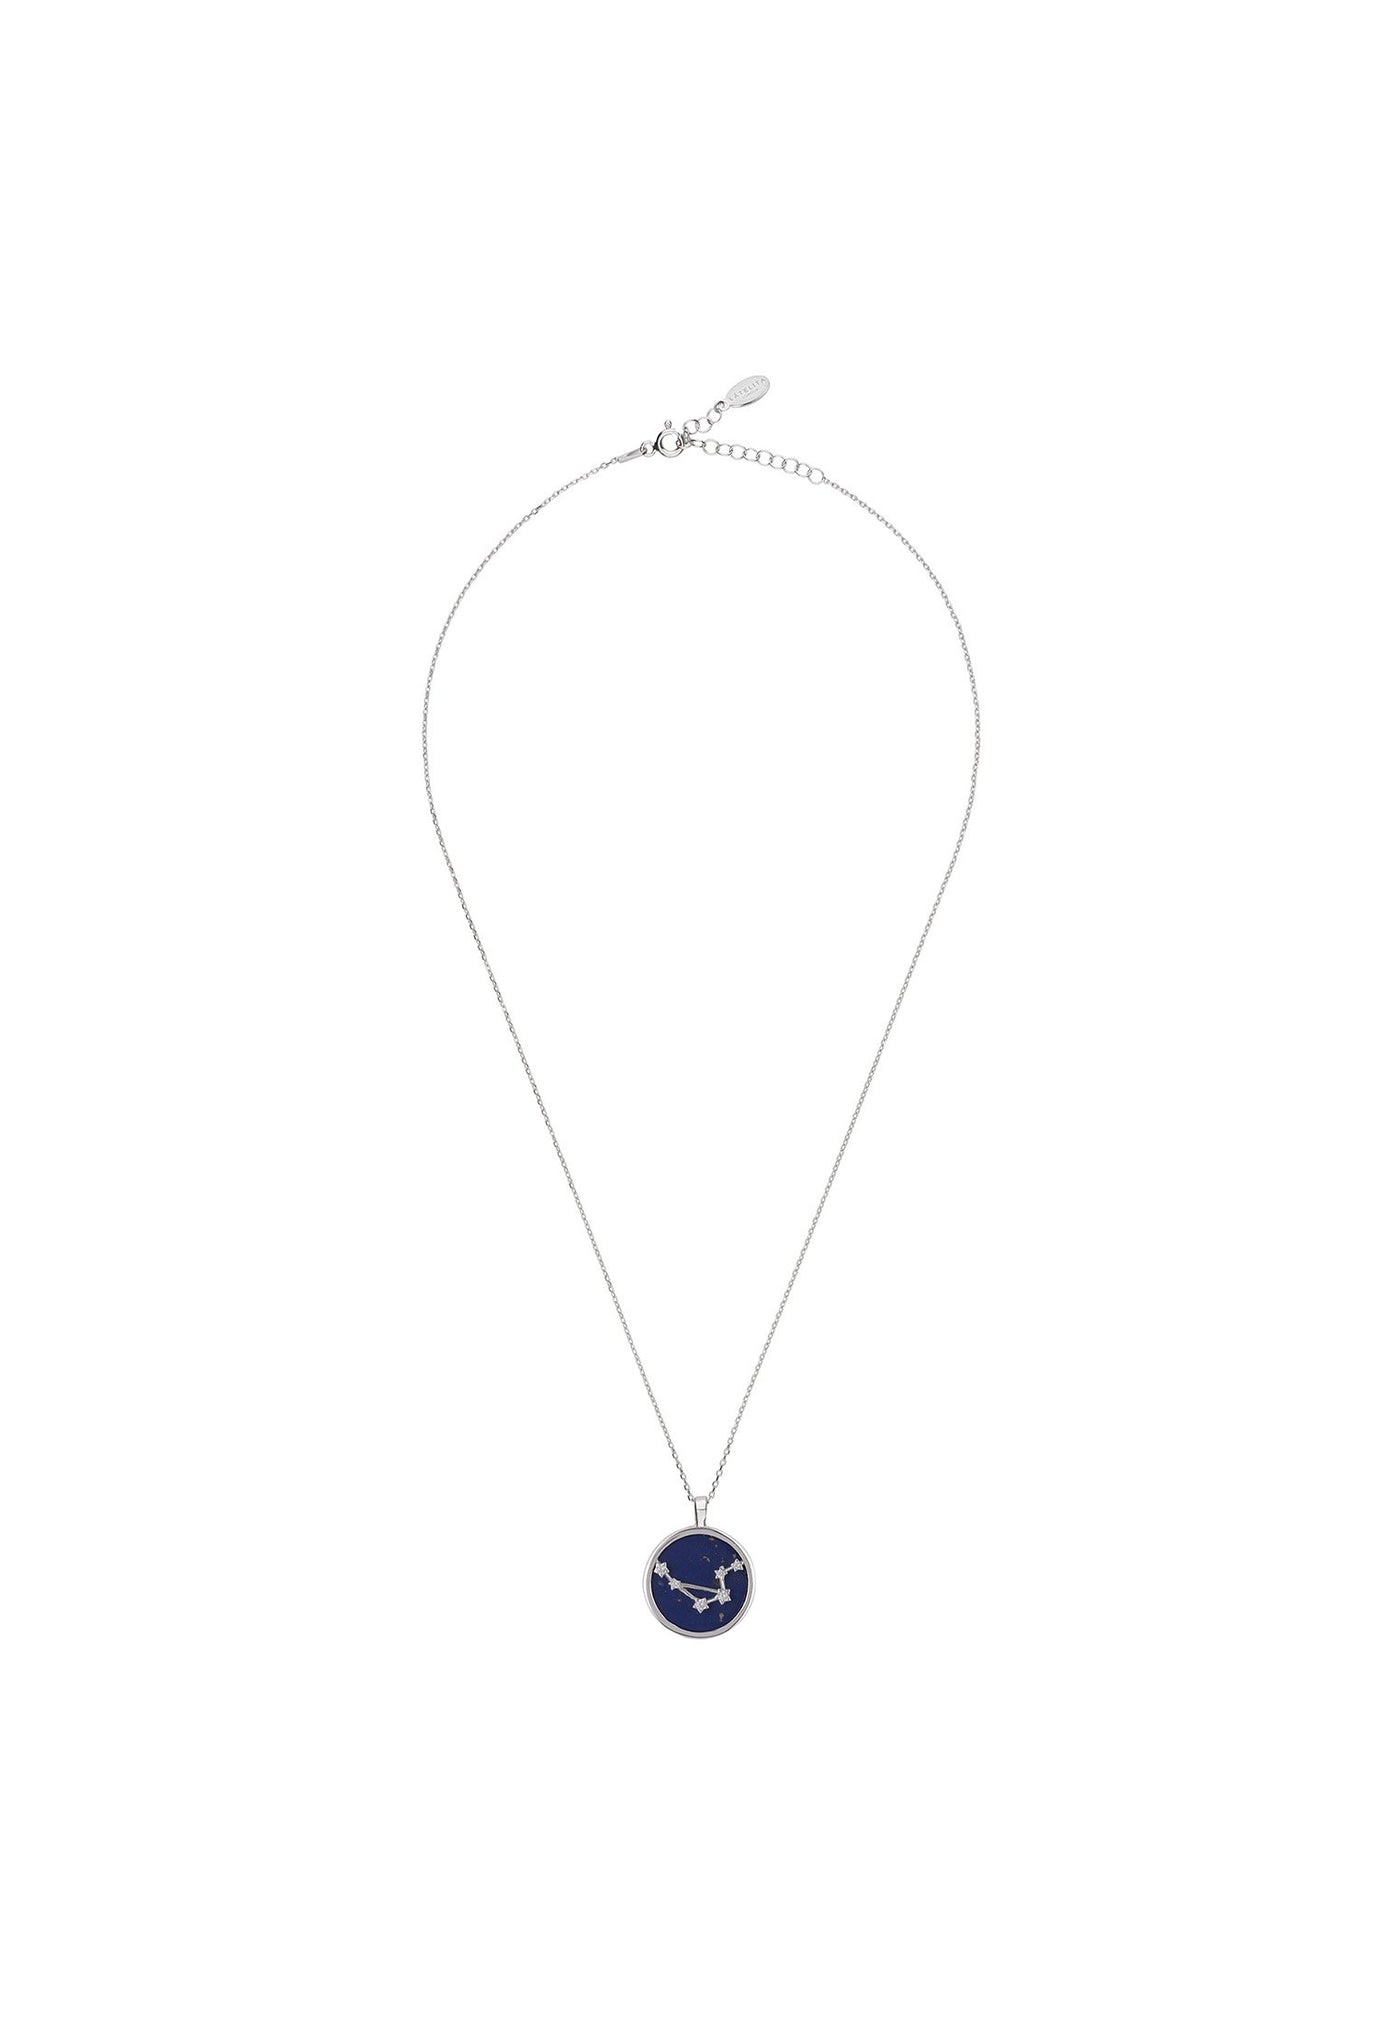 Libra - necklace - 925 sterling silver - lapis lazuli with white zirconia